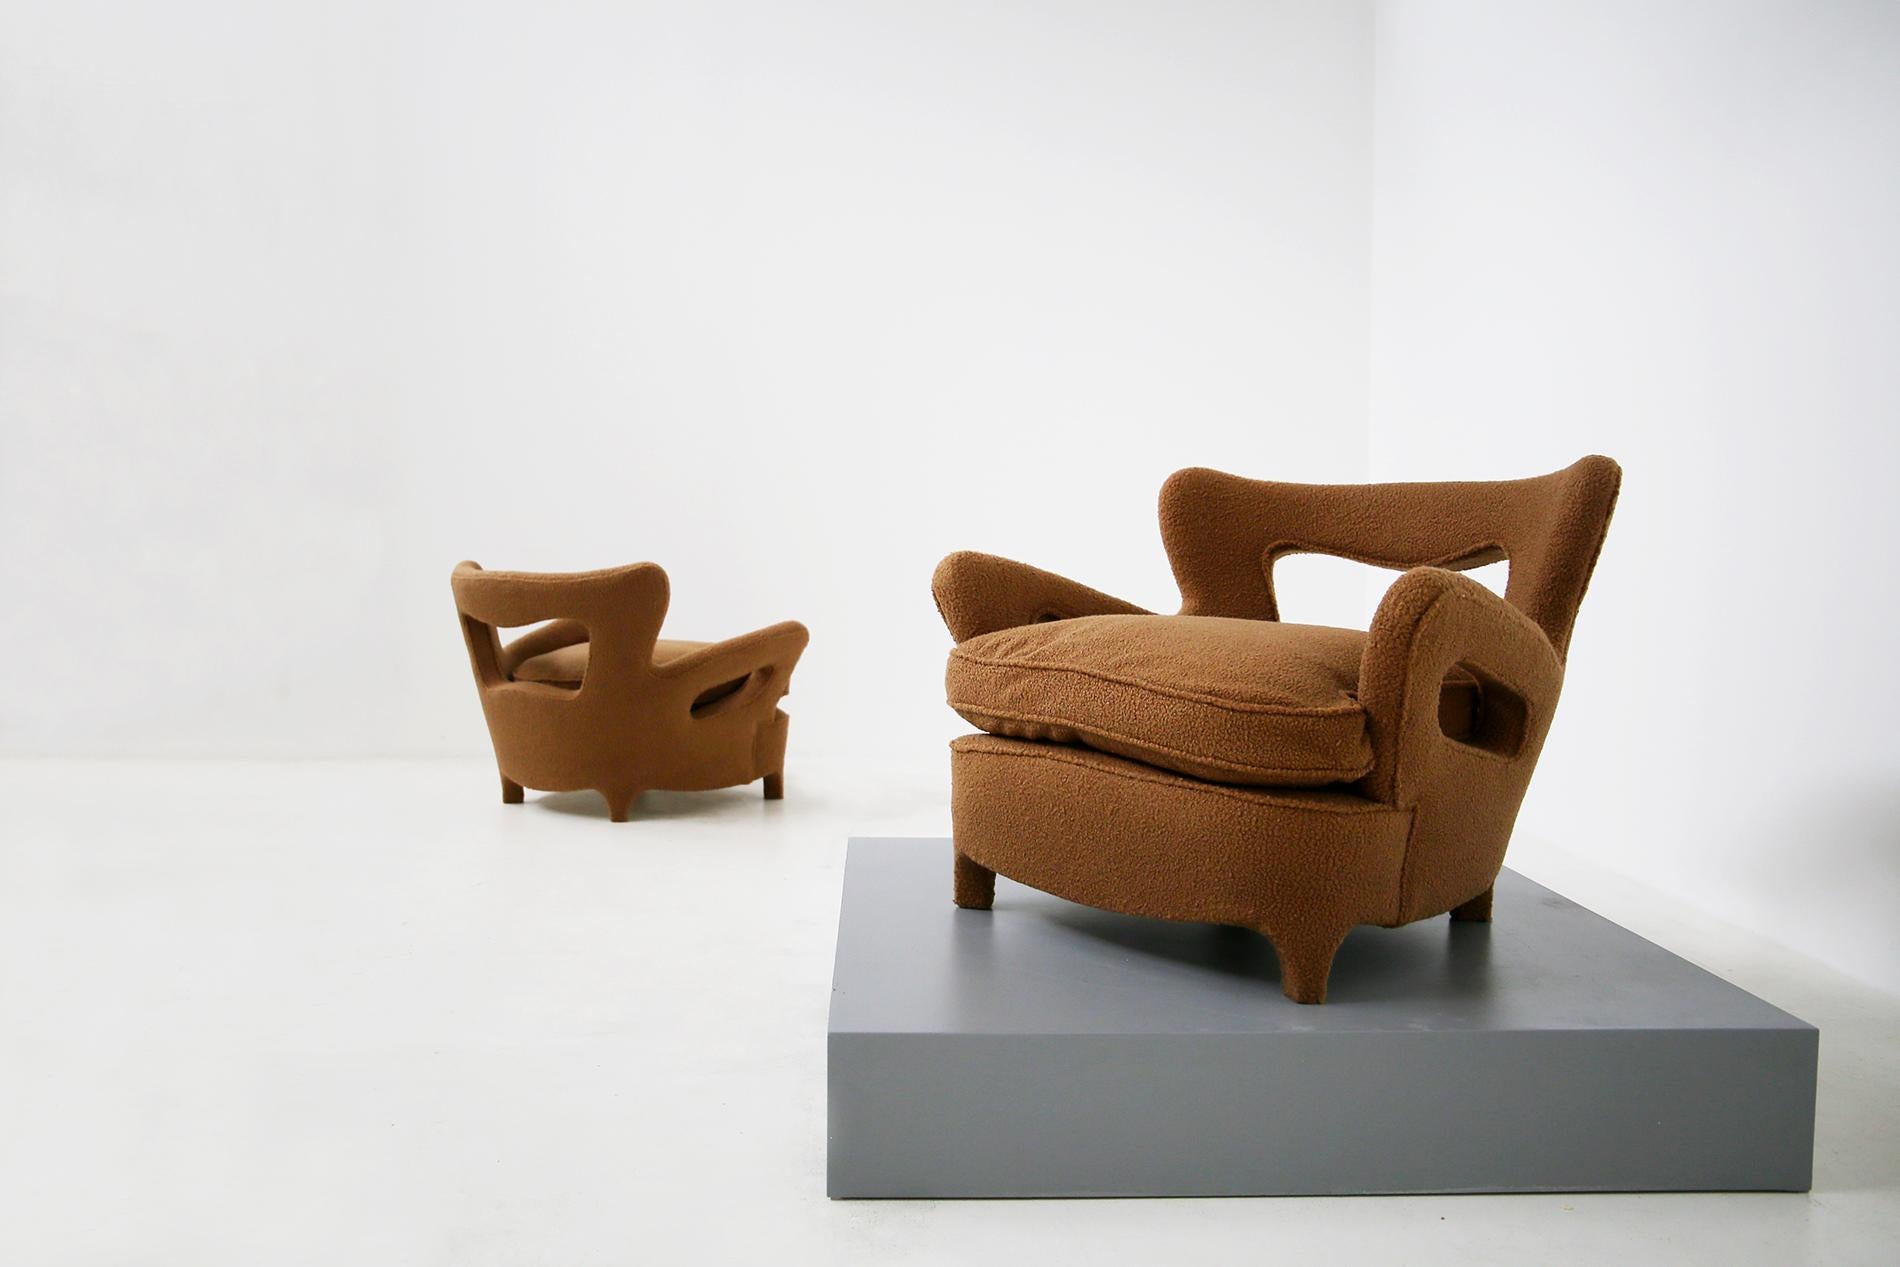 Rare pair of Italian armchairs by Carlo Enrico Rava from 1940. The armchairs have been restored in a beautiful bouclè fabric very fashionable in this period. The fabric is brown that gives the seat warmth and softness. The peculiarity of the